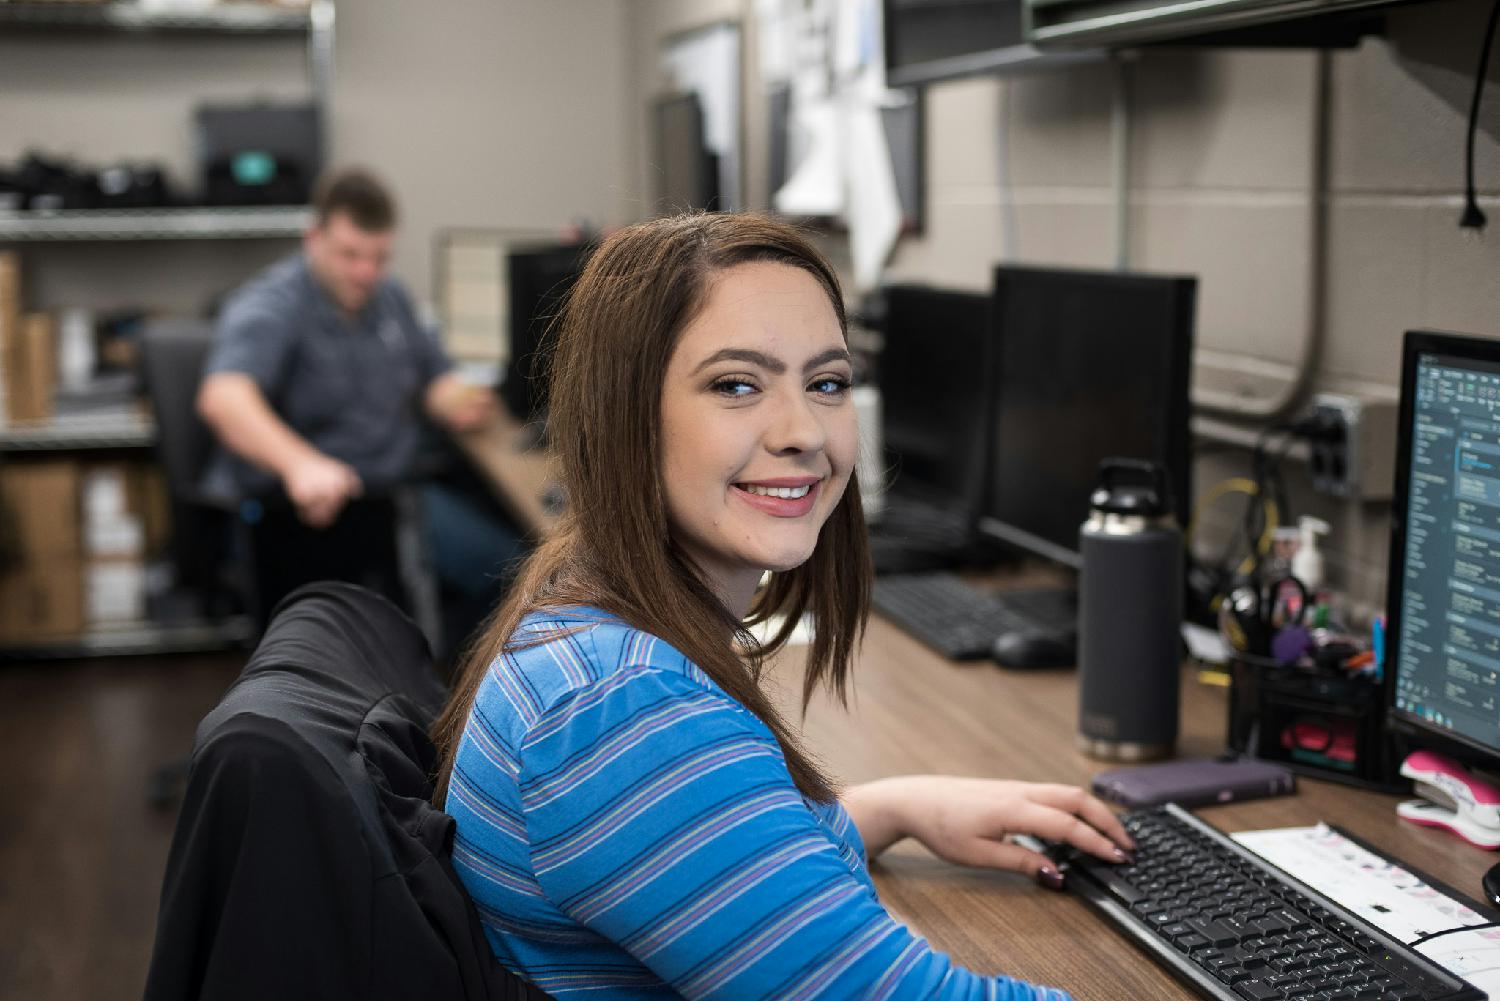 Our IT department is rapidly growing and establishing an apprenticeship program.